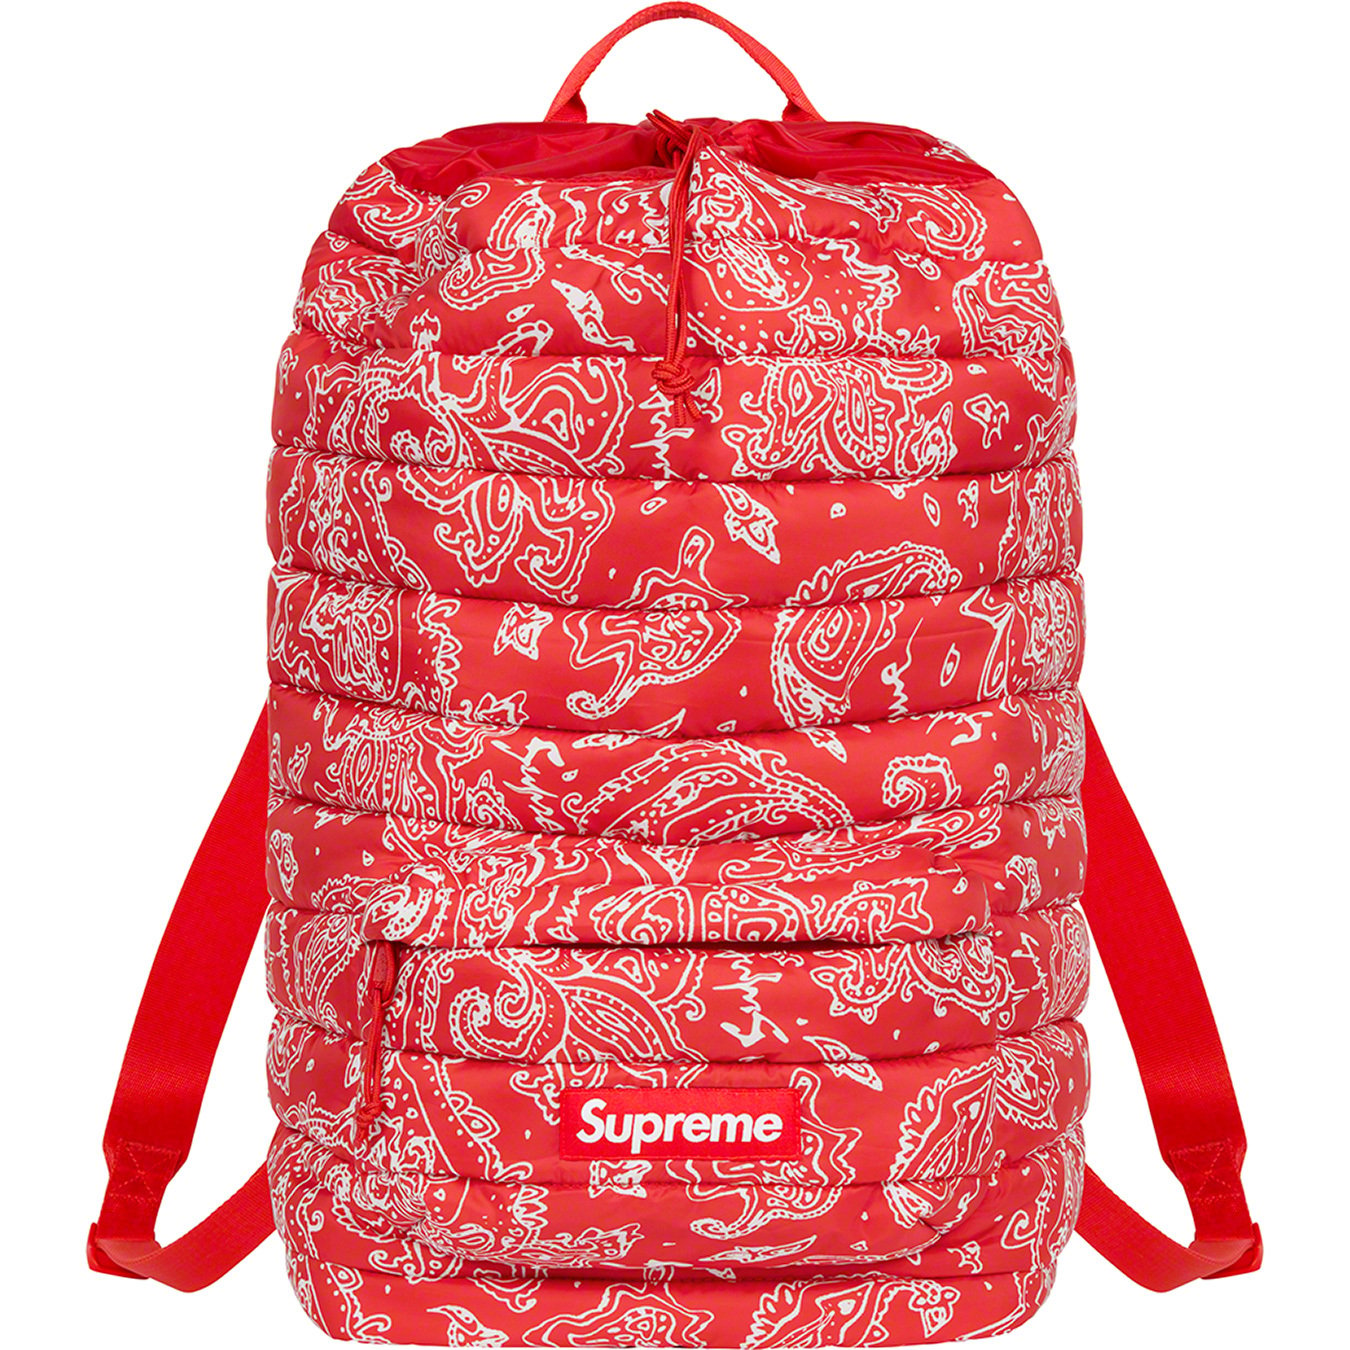 Supreme, Bags, New Supreme Puffer Backpack Blue Paisleynever Used